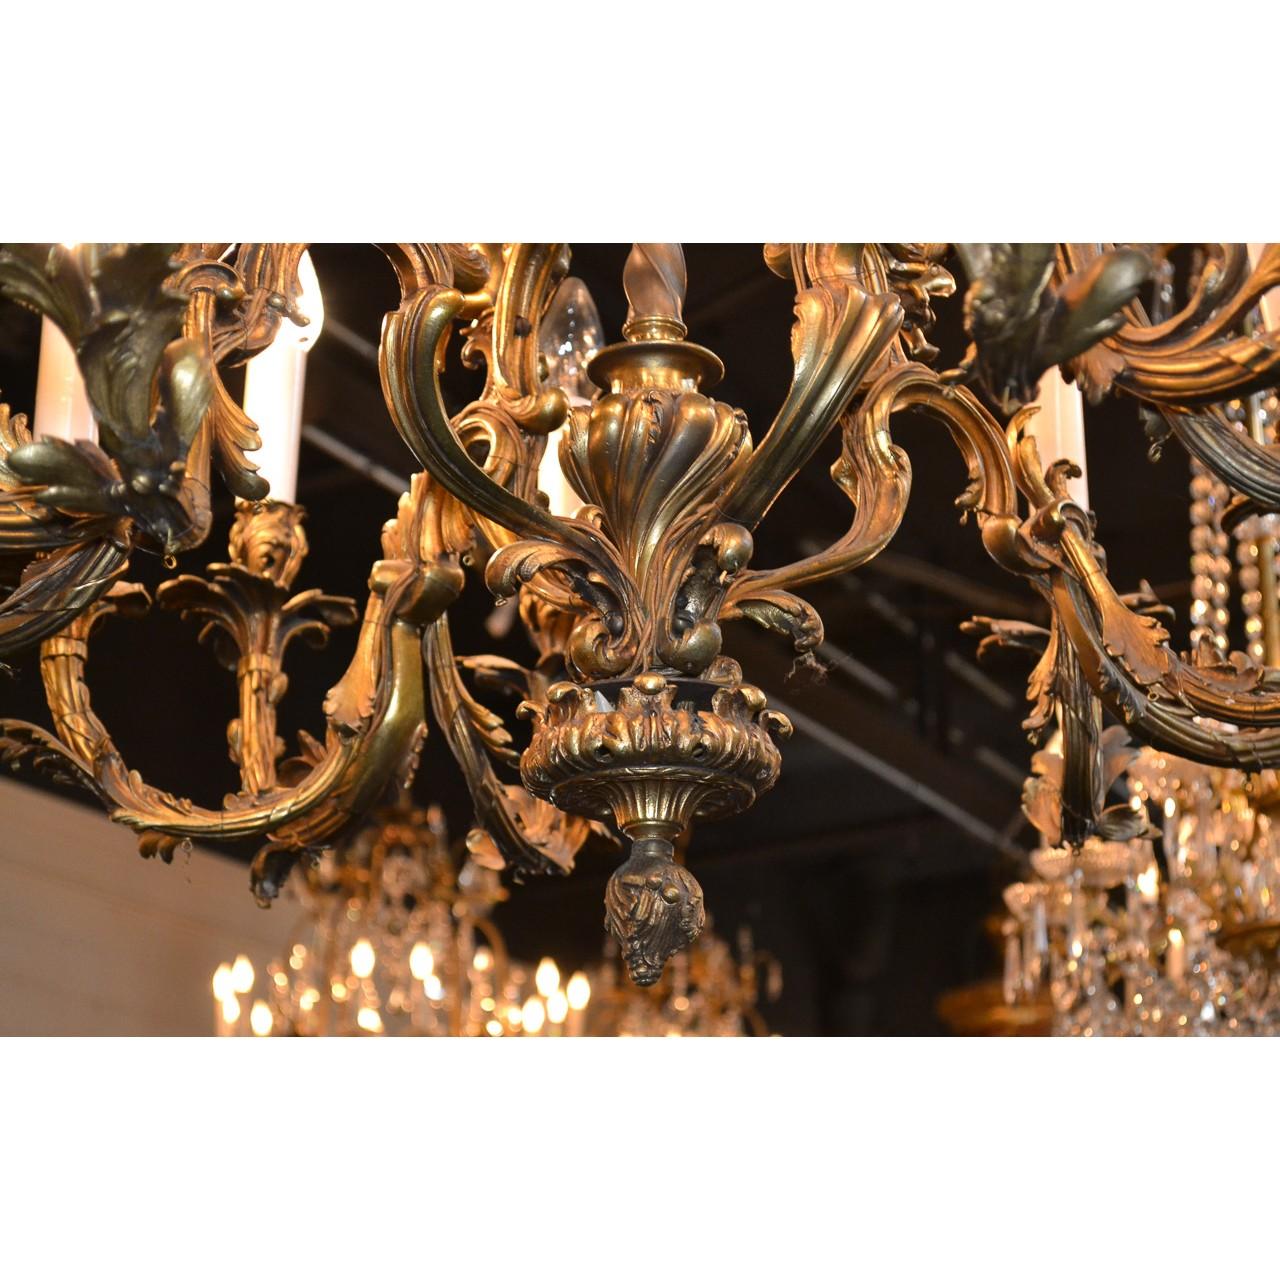 Extraordinary 19th century French Louis XV style gold-gilded bronze chandelier with a fanciful foliate motif canopy. The leaf scrolled open-cage with a central stem wrapped in garland and surmounted by twelve arms accented with highly detailed